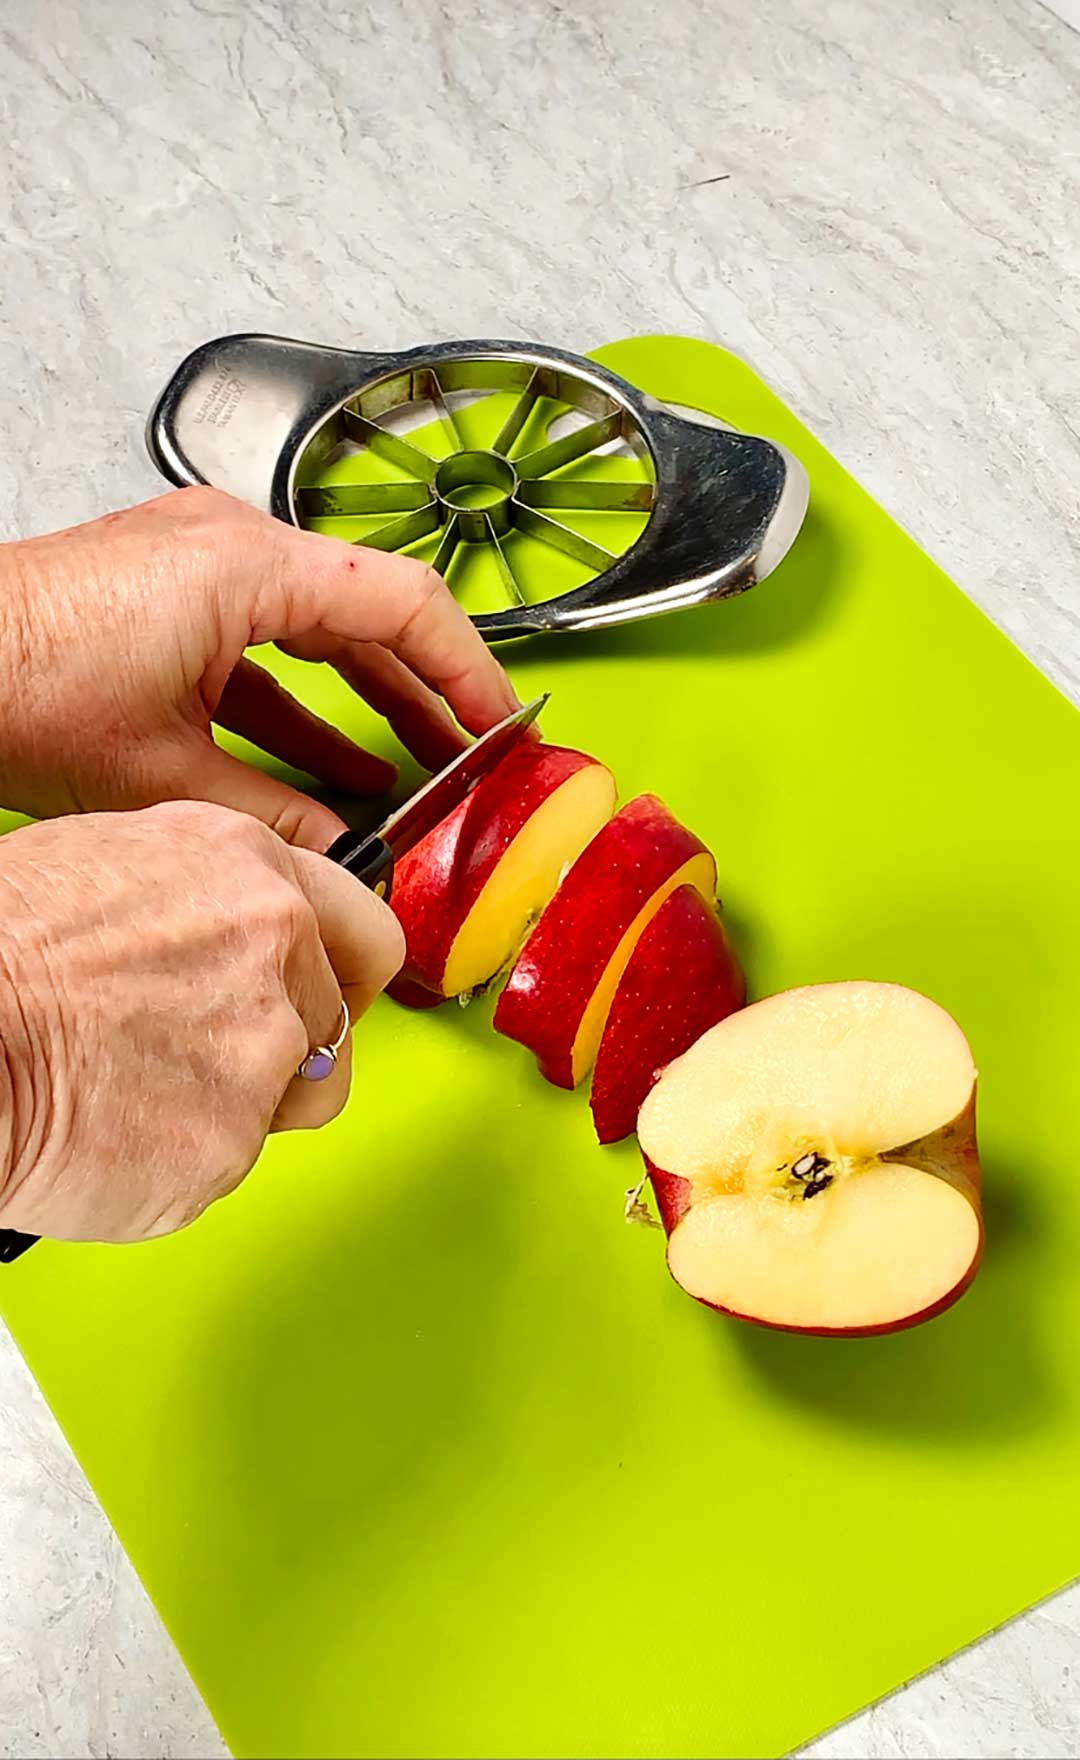 Person slicing apples with a knife on bright green cutting board.